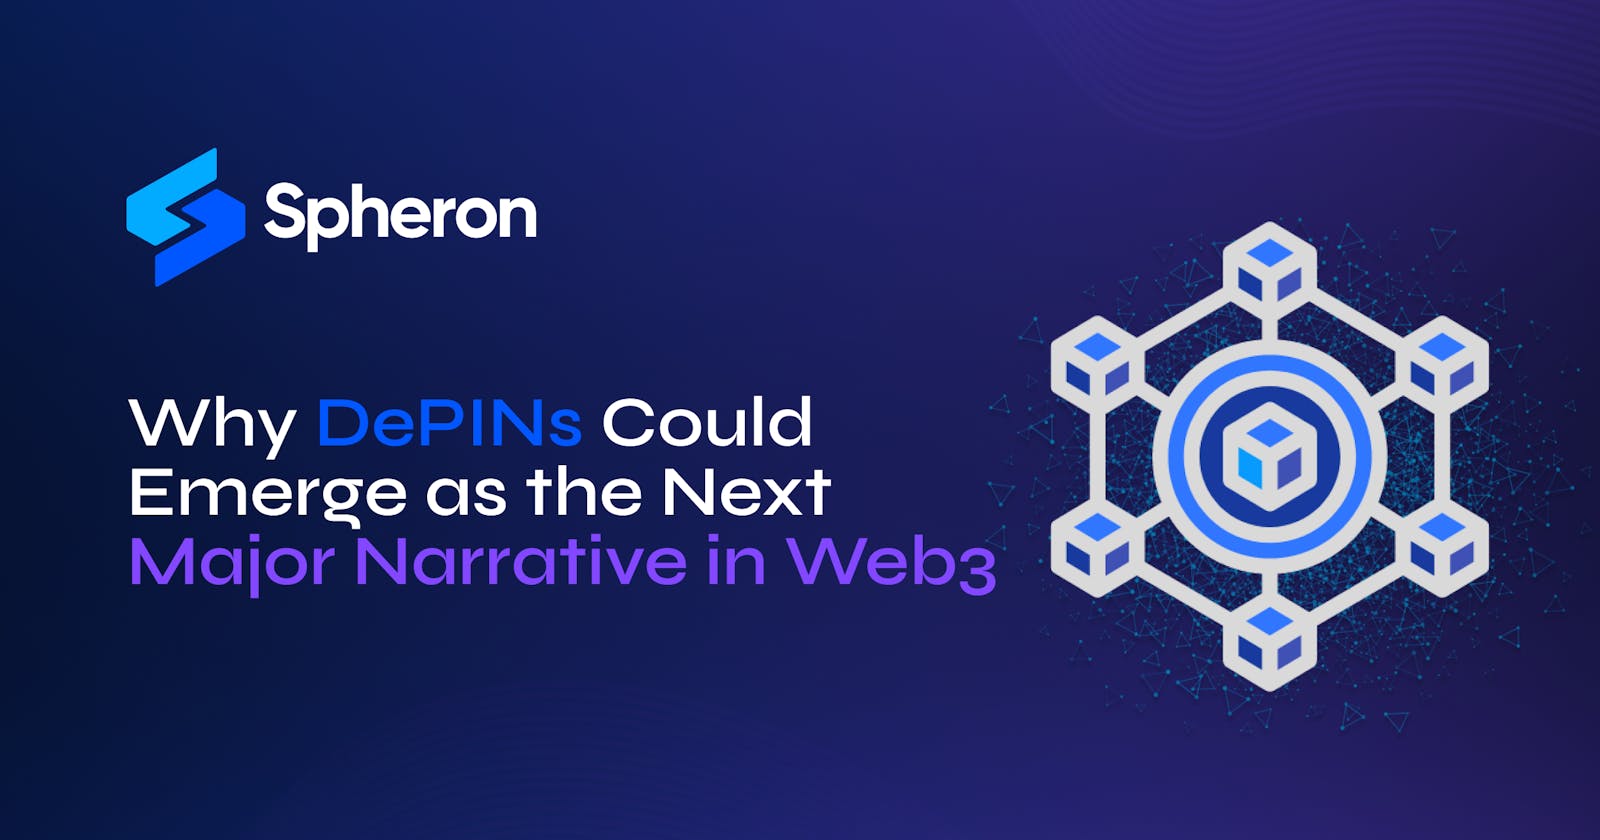 Why DePINs Could Emerge as the Next Major Narrative in Web3